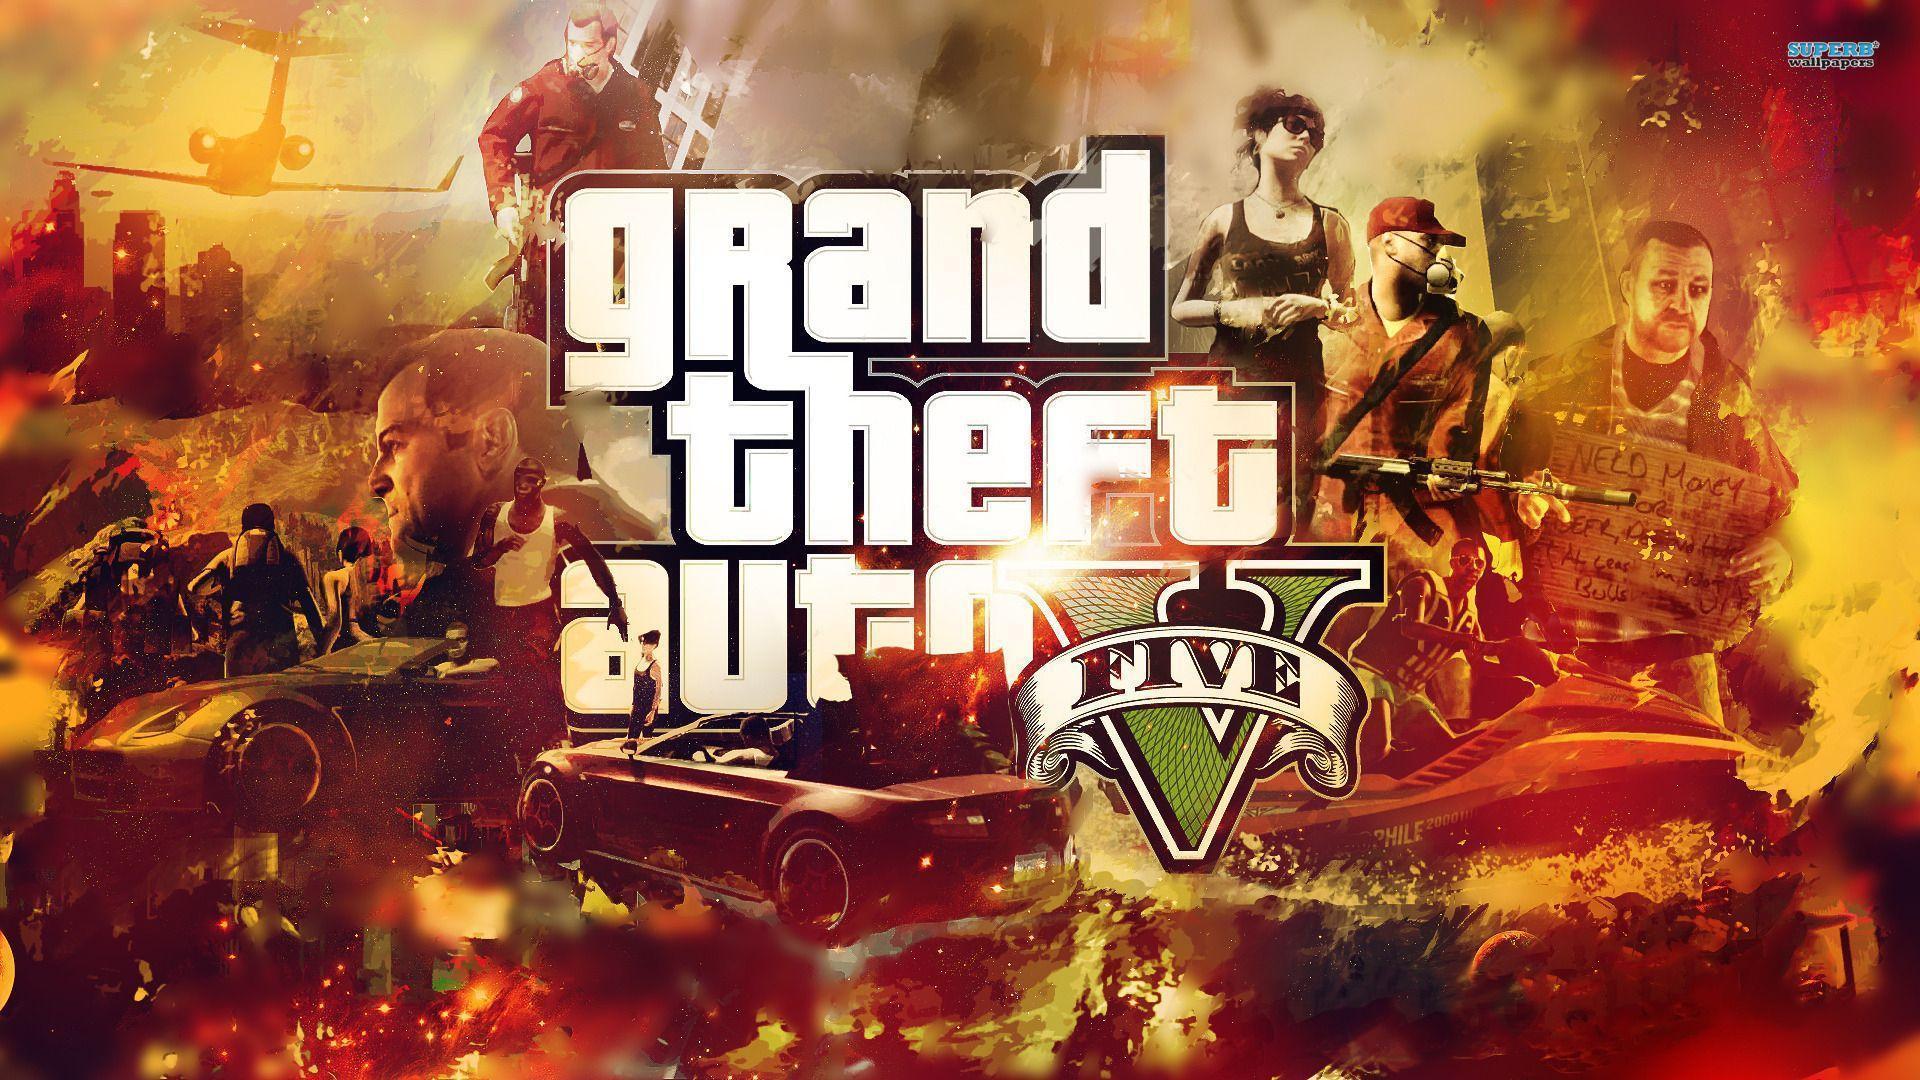 Collection of Gta 5 Wallpaper on HDWallpaper